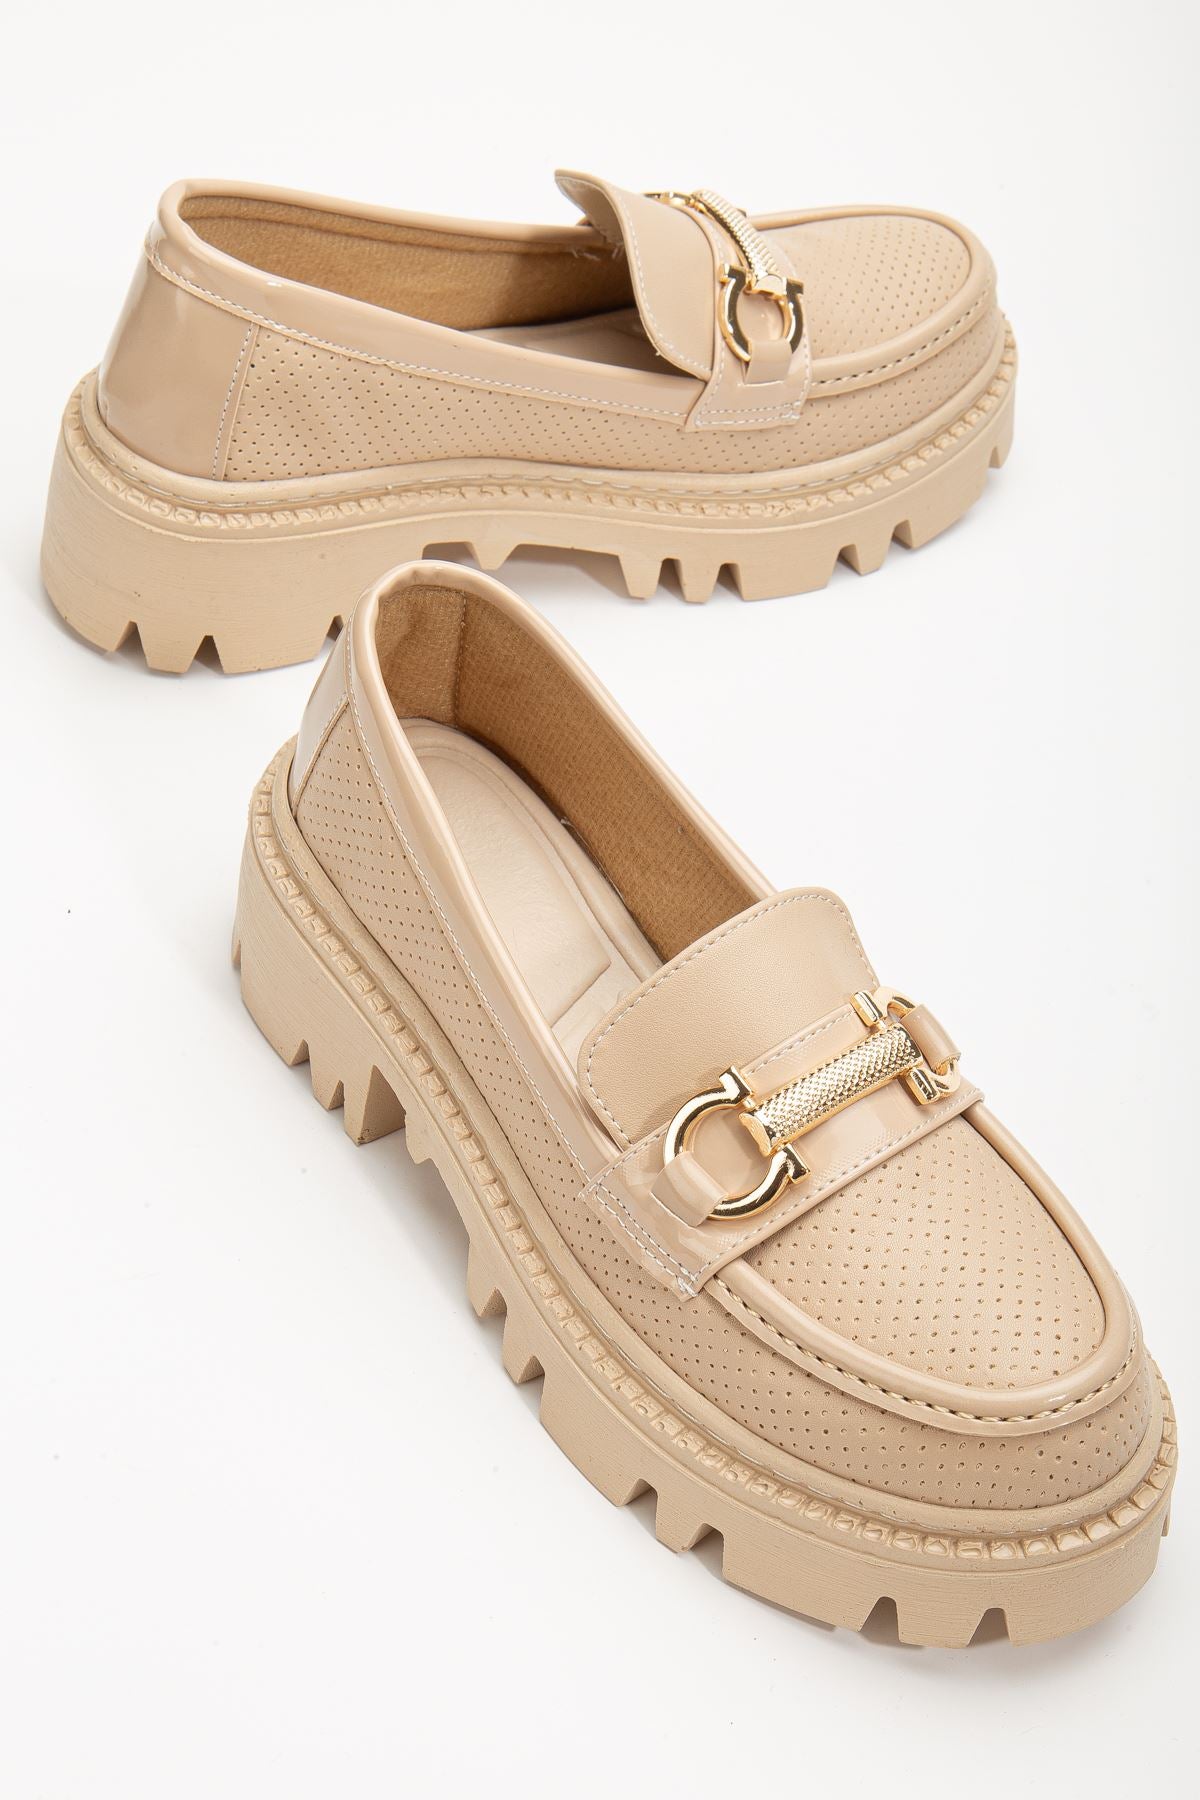 Women's Nude Buckle Detailed Oxford Shoes - STREETMODE ™